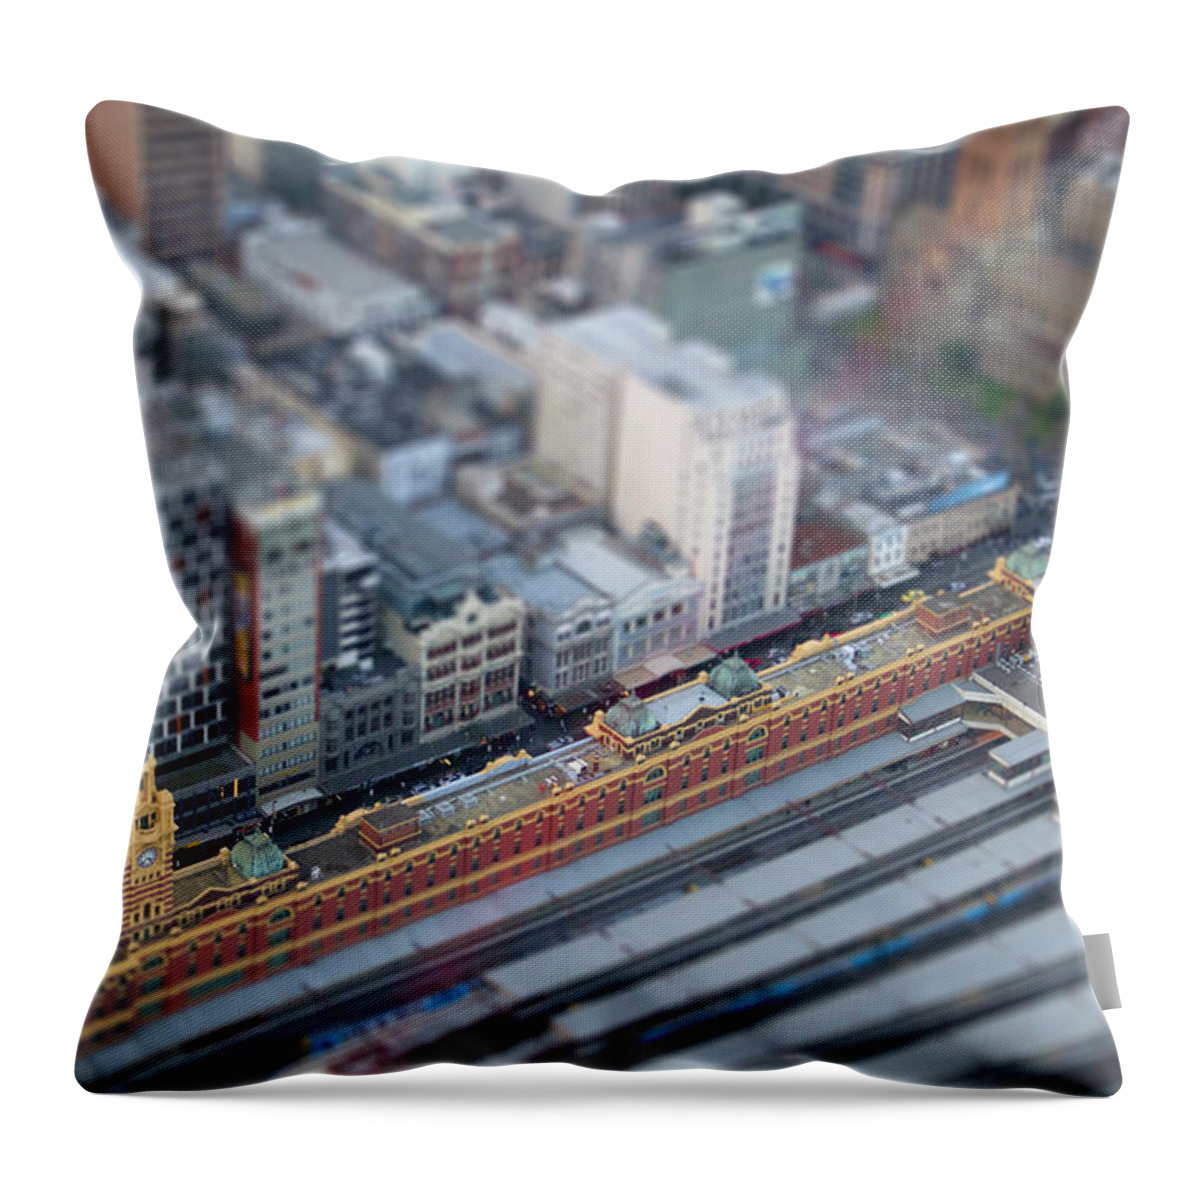 Outdoors Throw Pillow featuring the photograph Miniature Flinders Street Station by Ben Ivory